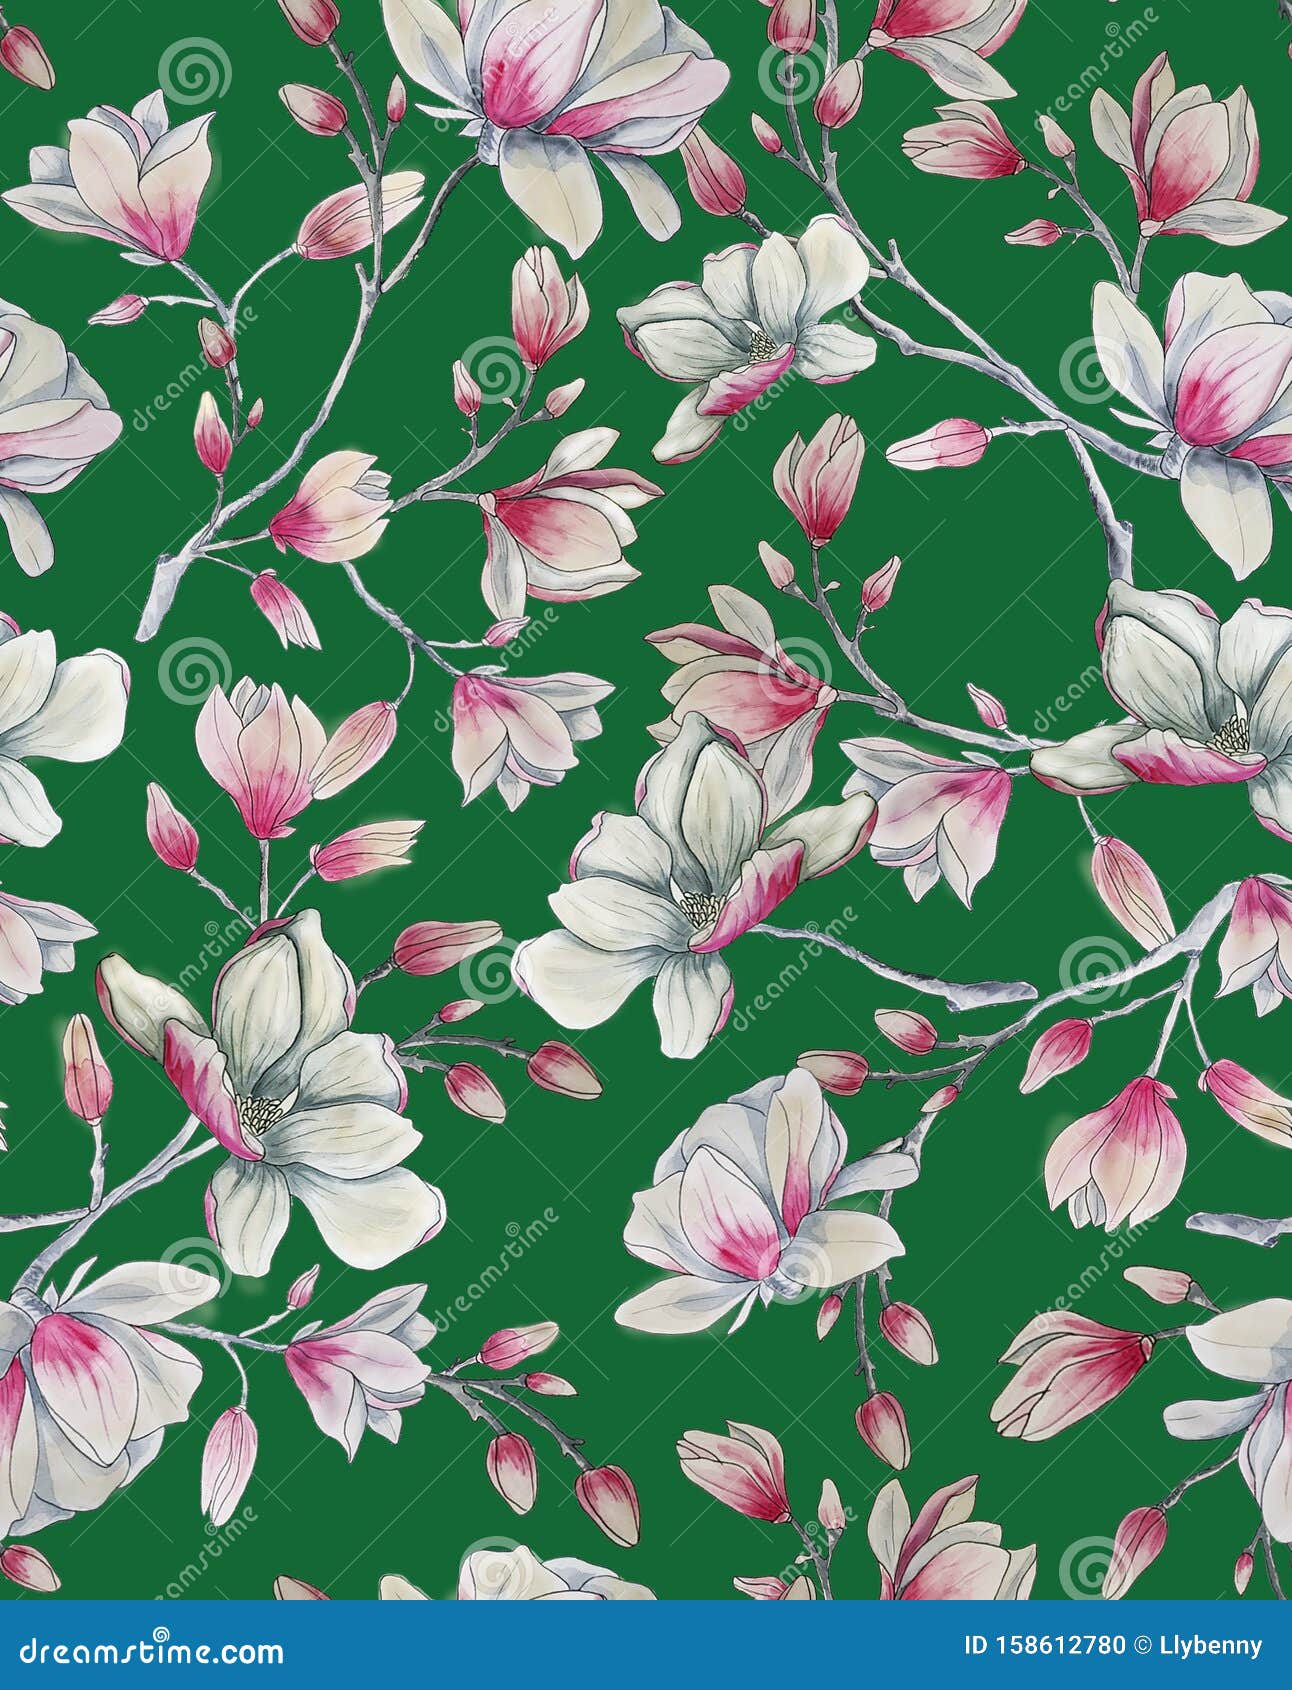 Watercolor Magnolia Flower Seamless Pattern In Kelly Green Ground